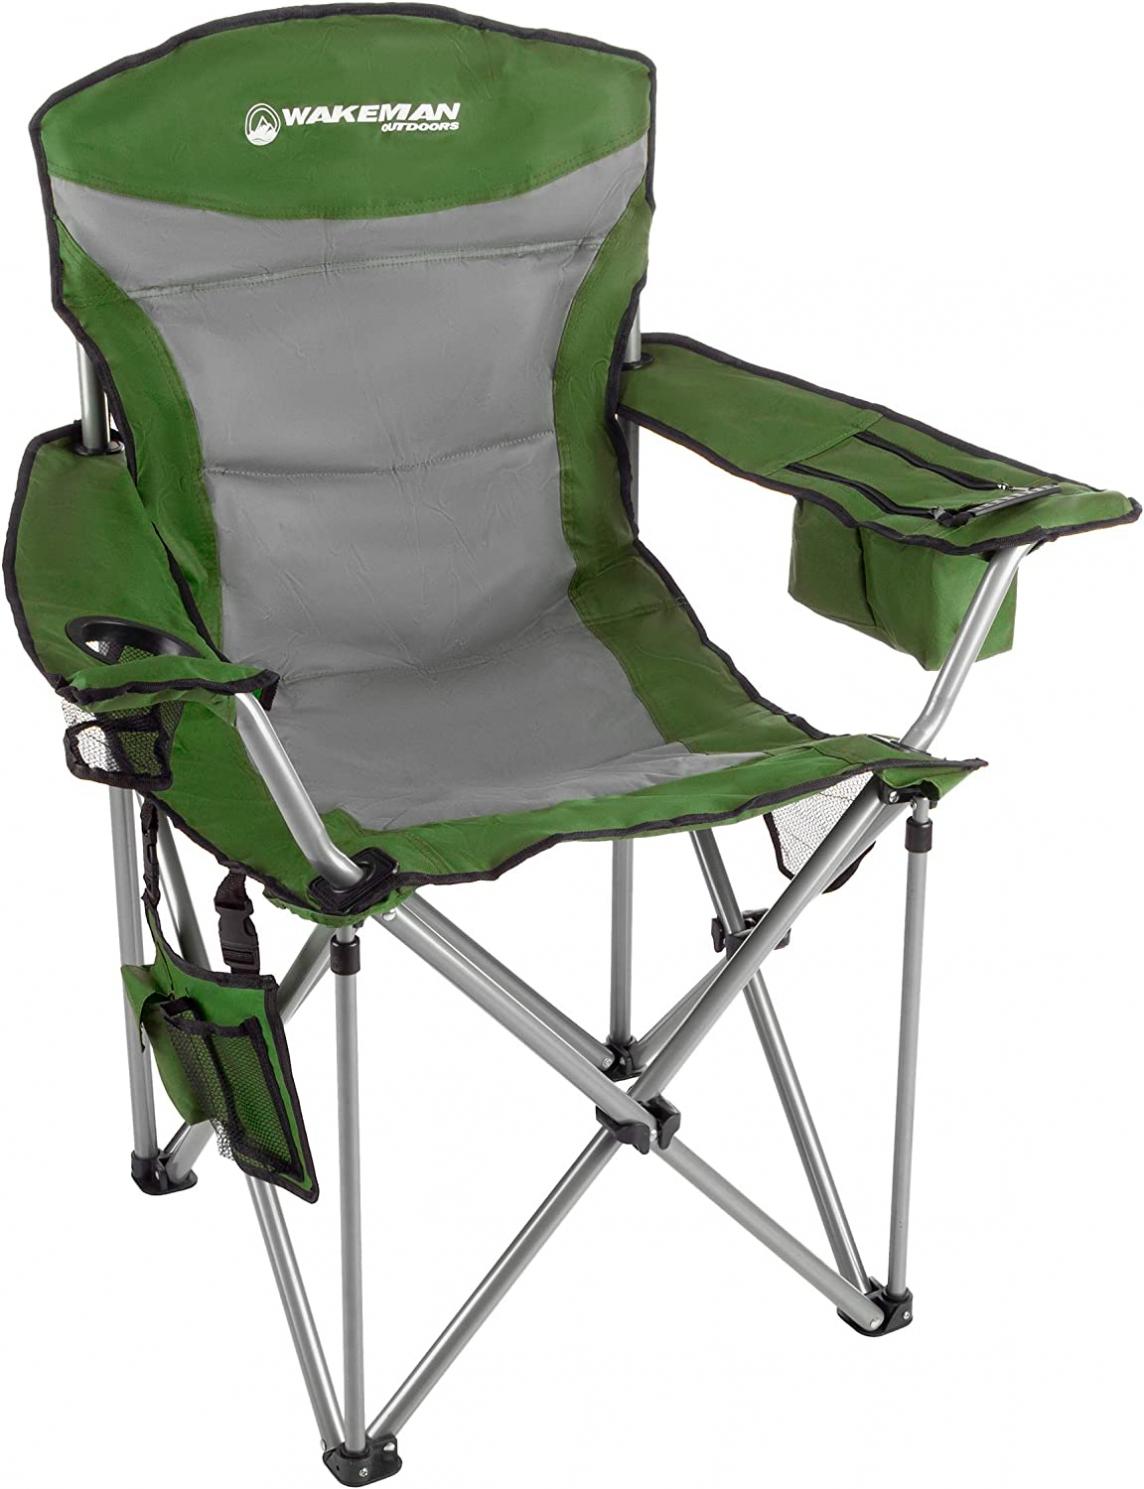 Heavy Duty Camp Chair-850lb High Weight Capacity Big Tall Quad Seat-Cup Holder, Cooler, Carrying Bag-Tailgating, Camping, Fishing by Wakeman Outdoors